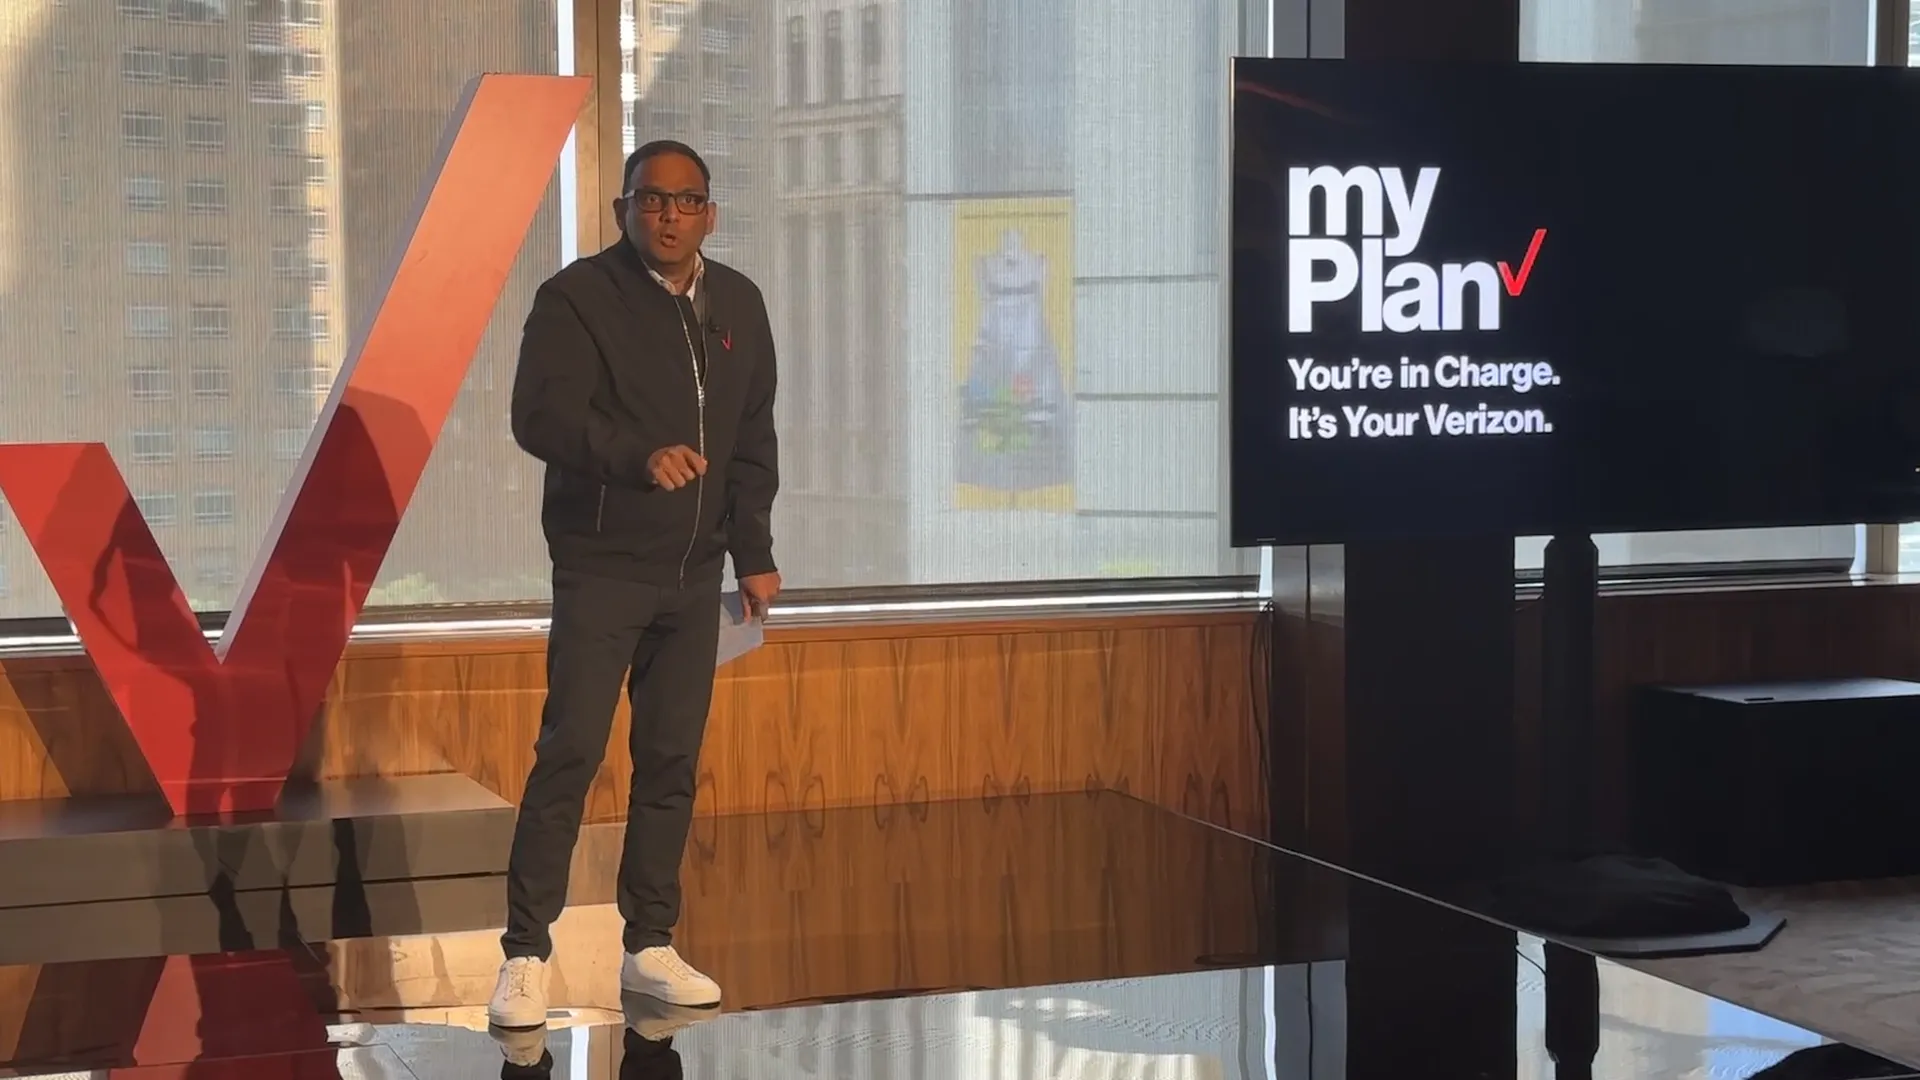 Verizon Is Changing the Game for Millions of Subscribers by Enabling the New My Plan and Tech Upgrades